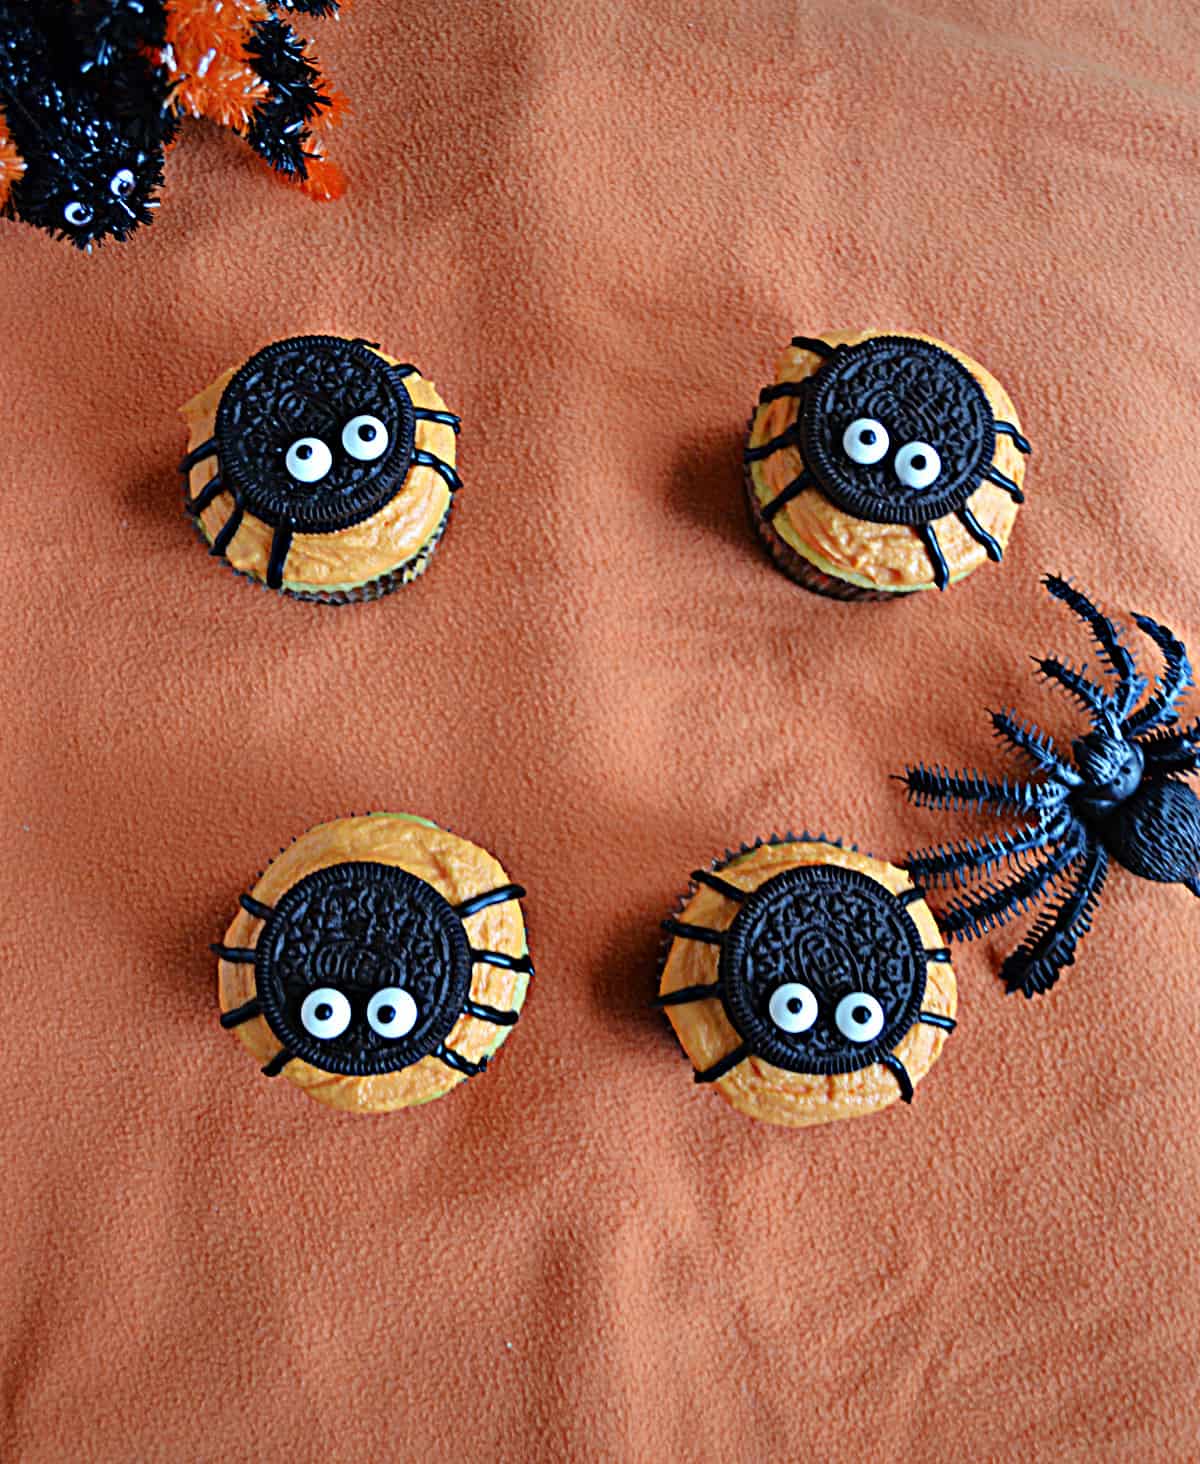 Four cupcakes with Oreo spiders on top and two toy spiders in the background.